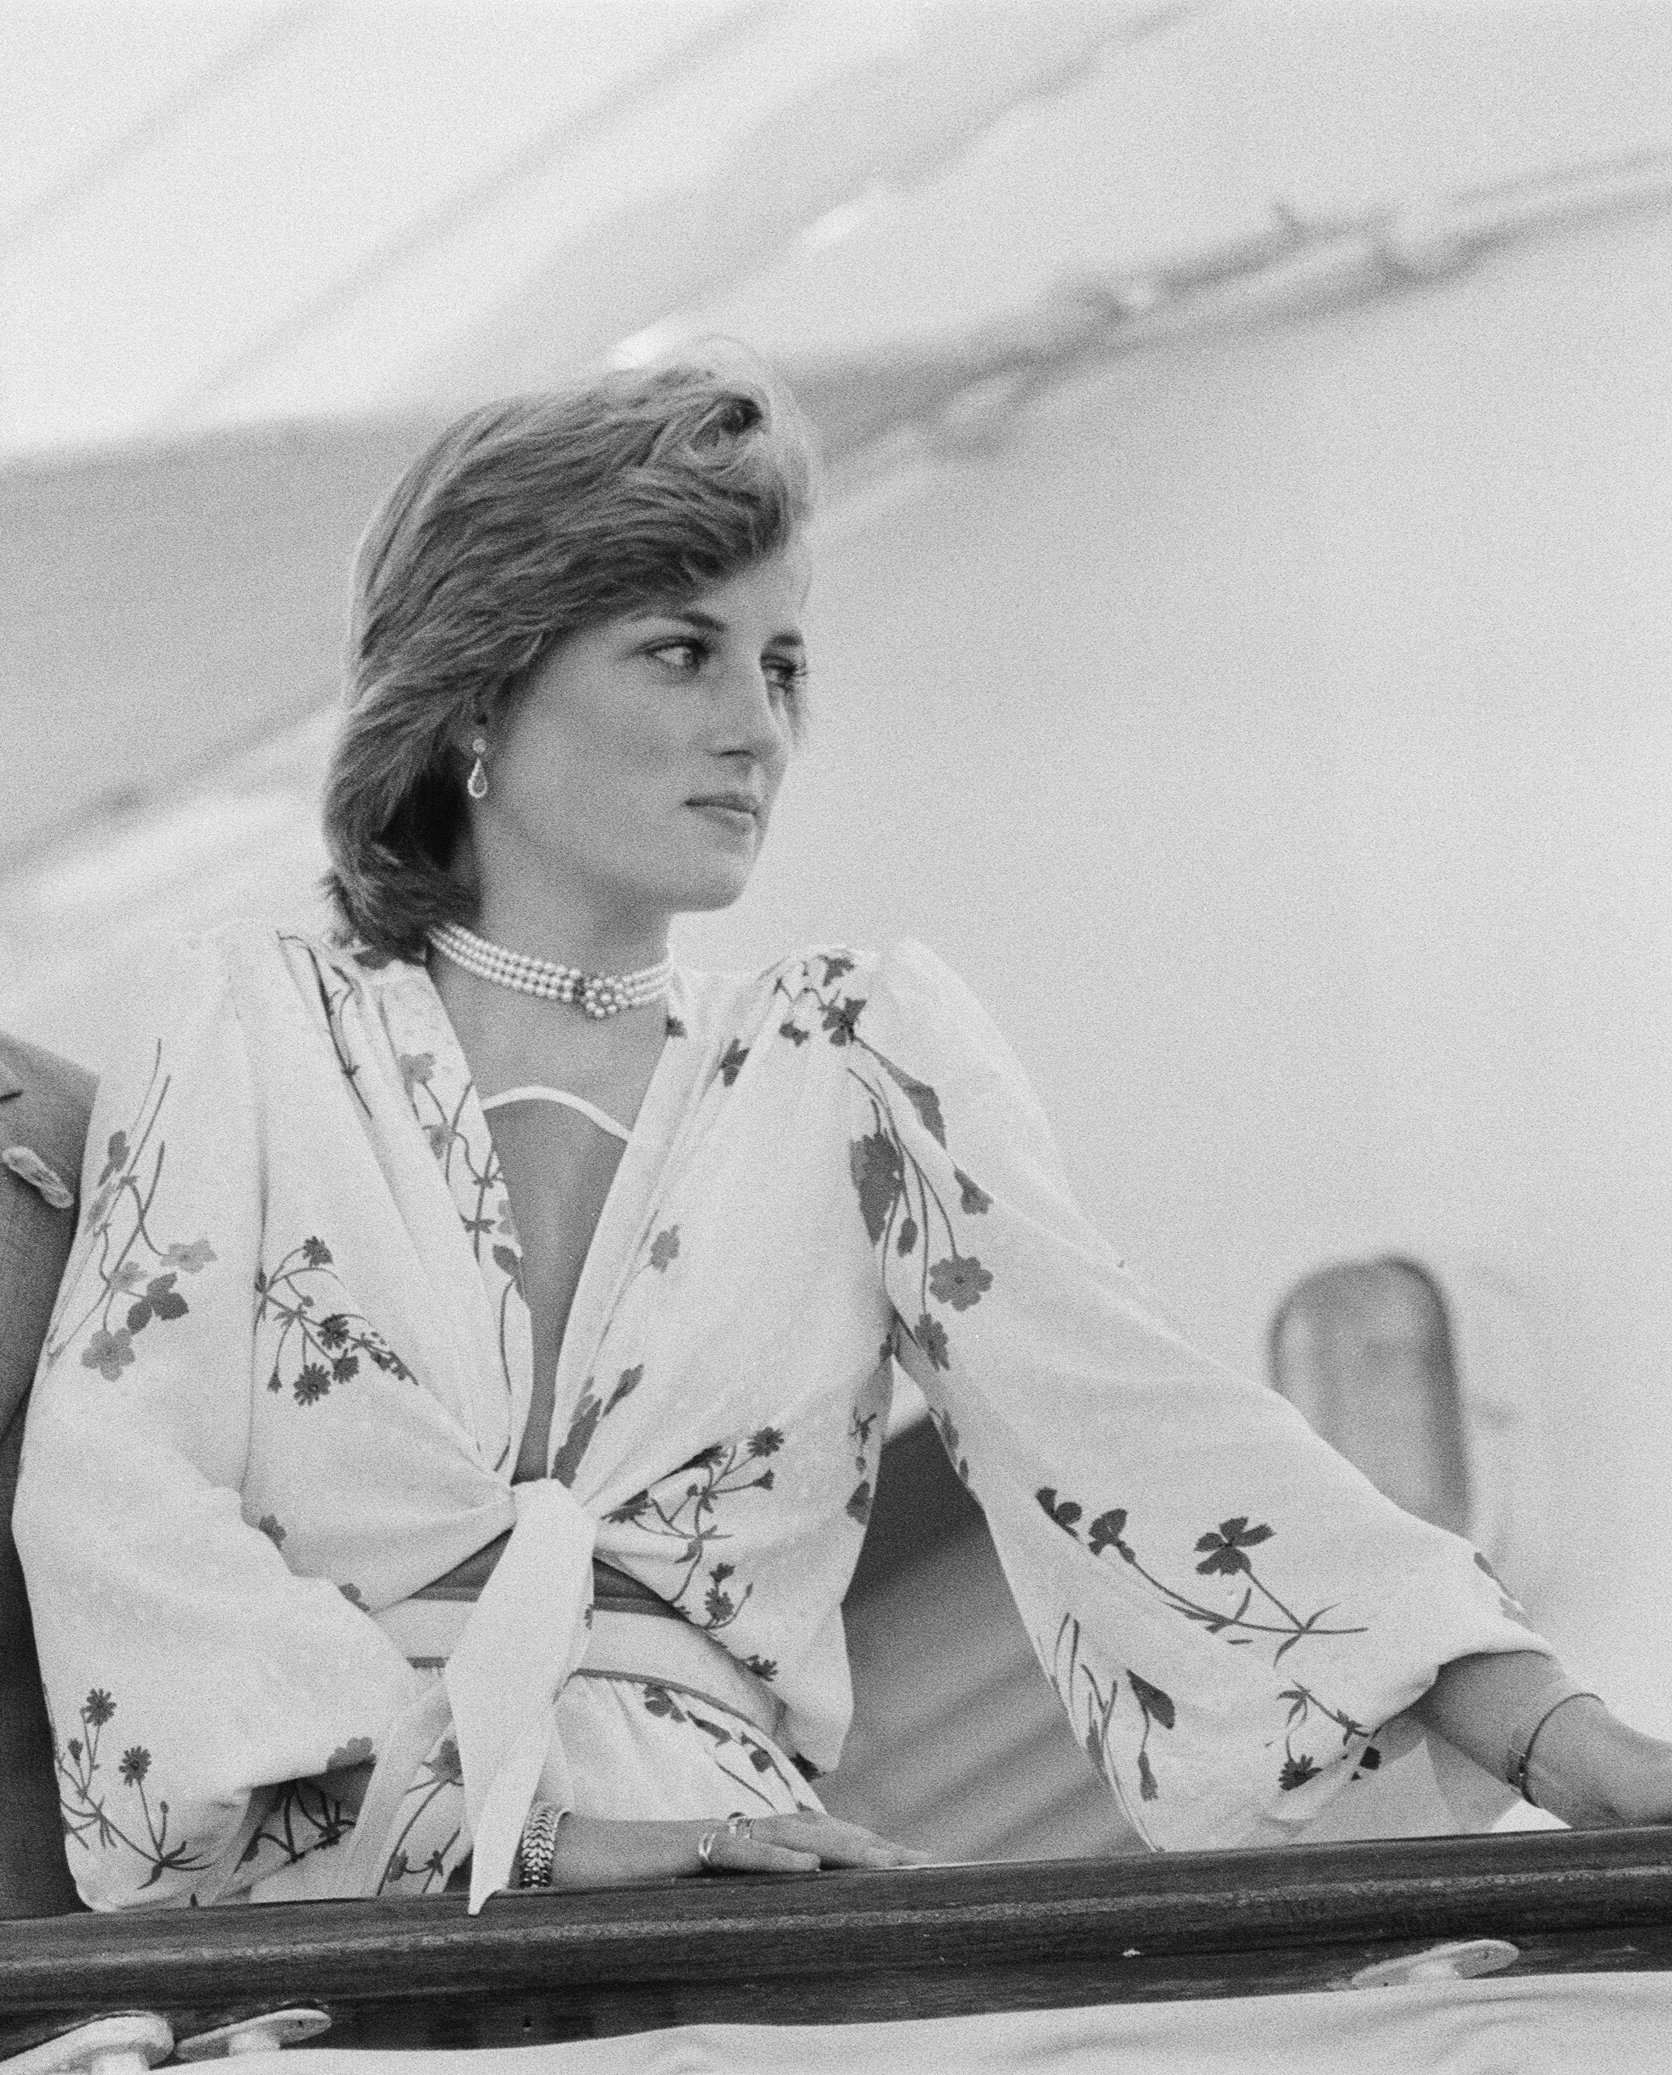 Princess Diana in Gibraltar for her honeymoon with her husband Prince Charles on August 1, 1981. / Source: Getty Images